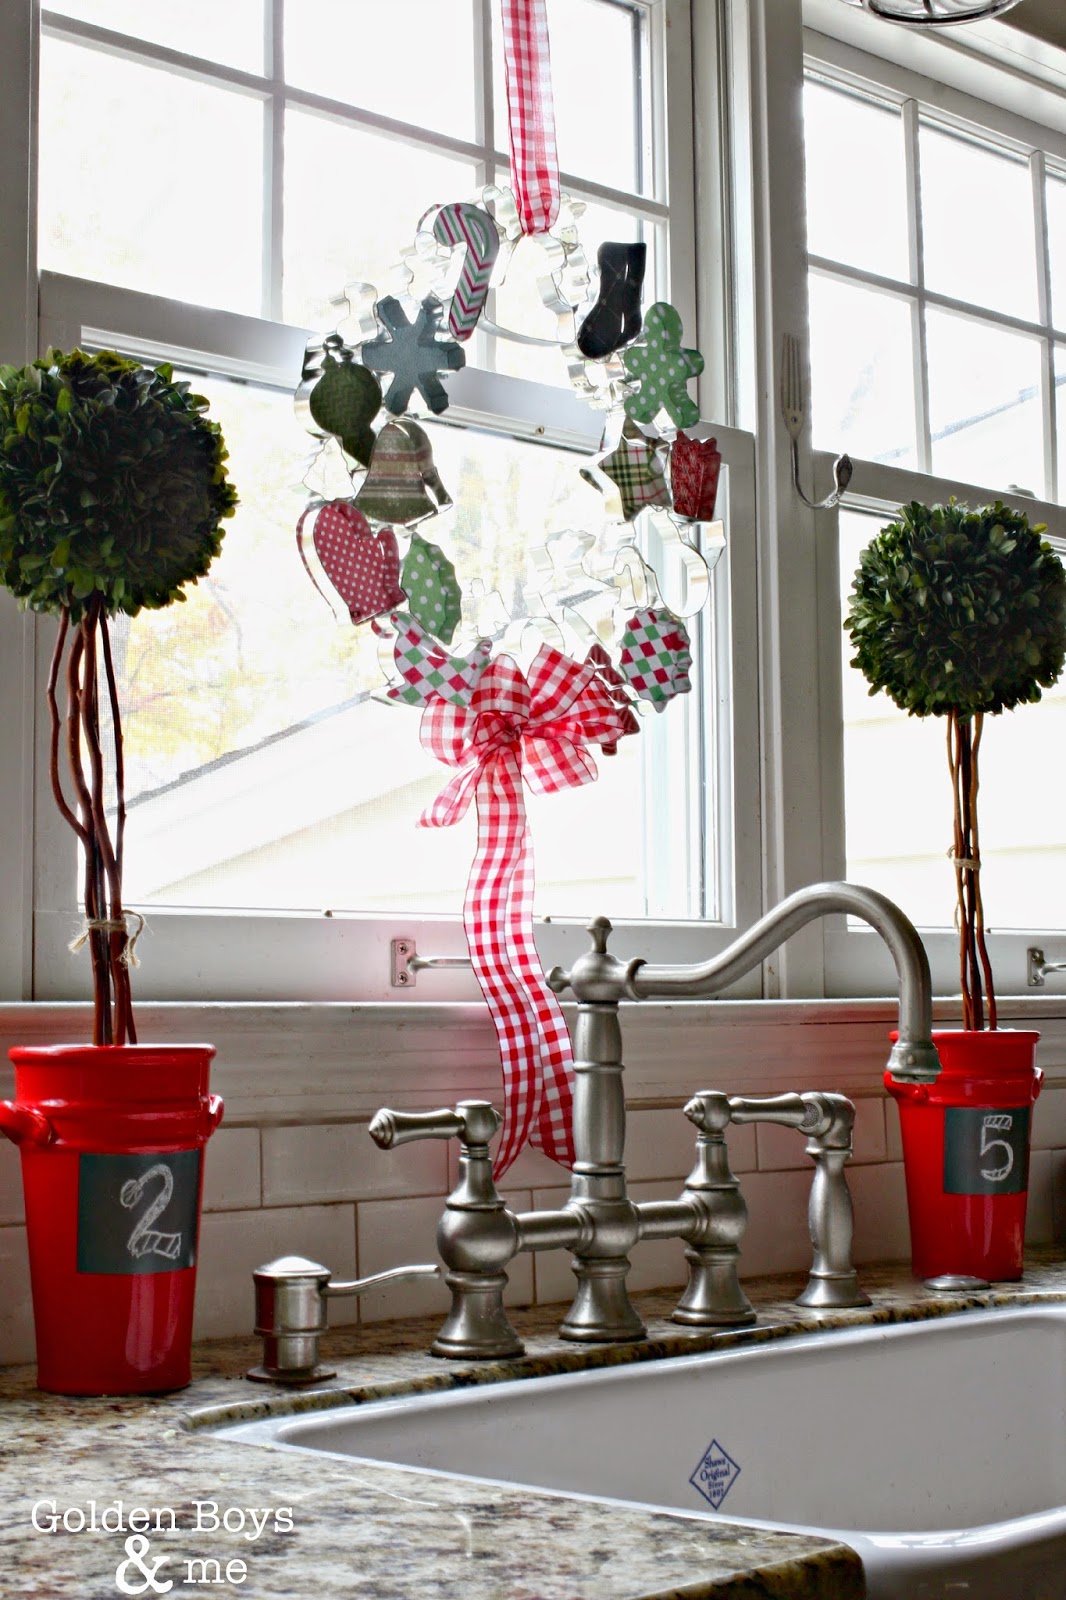 Cookie Cutter wreath over sink in Christmas decor with preserved boxwood topiaries-www.goldenboysandme.com